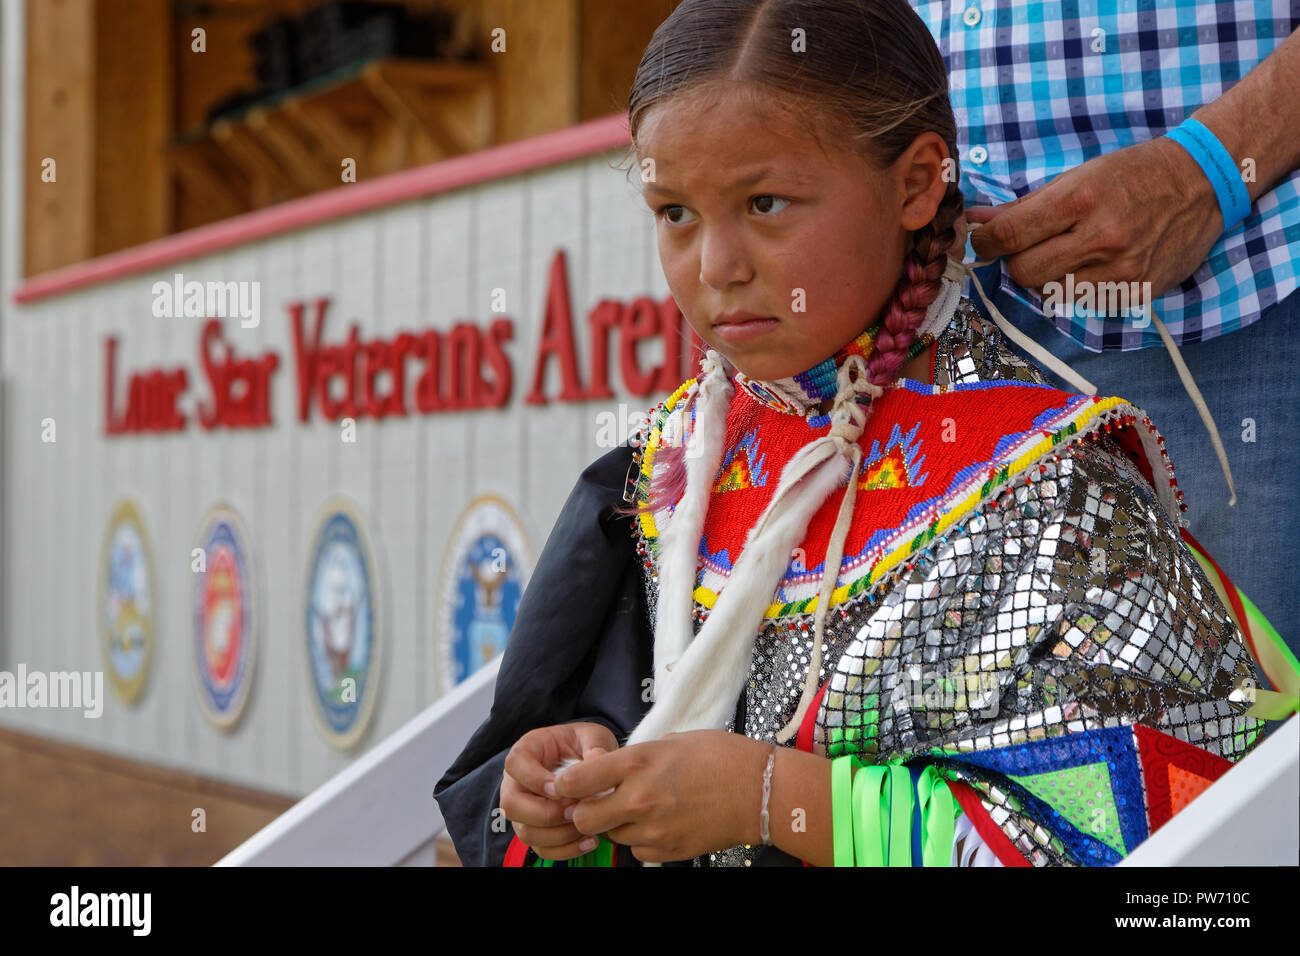 BISMARK, NORTH DAKOTA, September 8, 2018 : Preparation for the 49th annual United Tribes Pow Wow, one large outdoor event that gathers more than 900 d Stock Photo